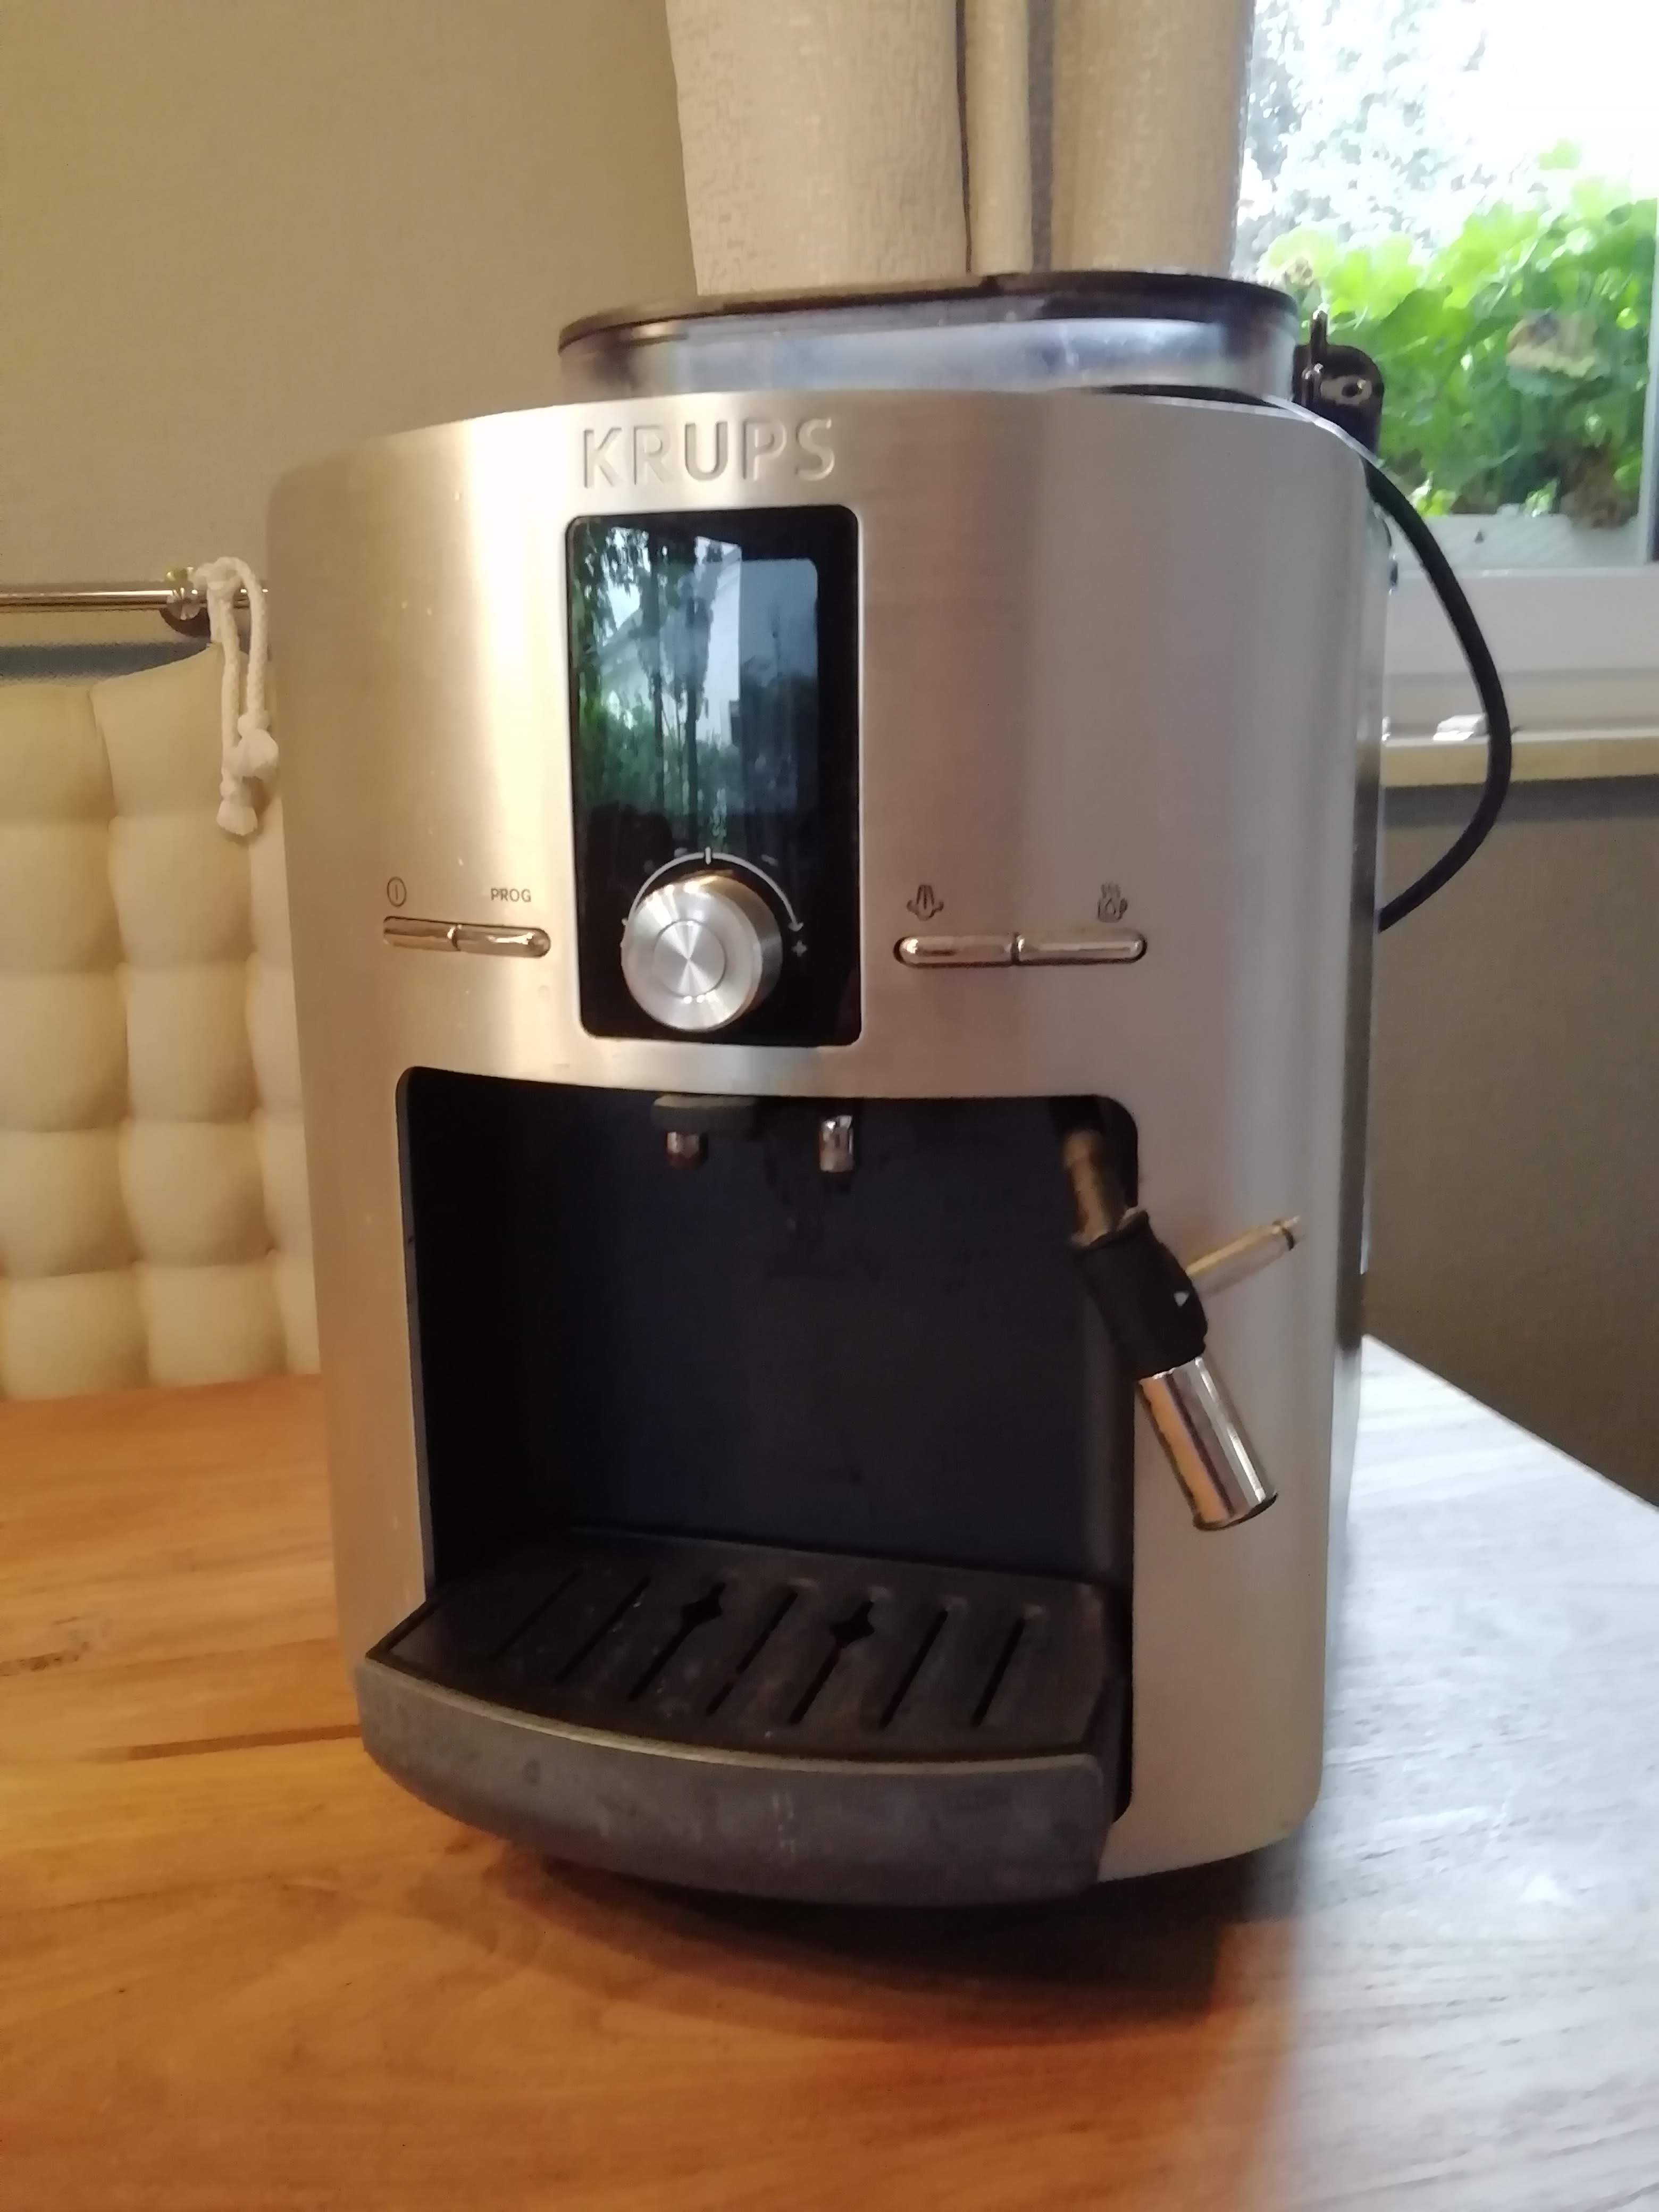 Bean2cup.org | Krups machine for hobbyists - to hand over Krups EA8260  (Tips & Questions >> General)